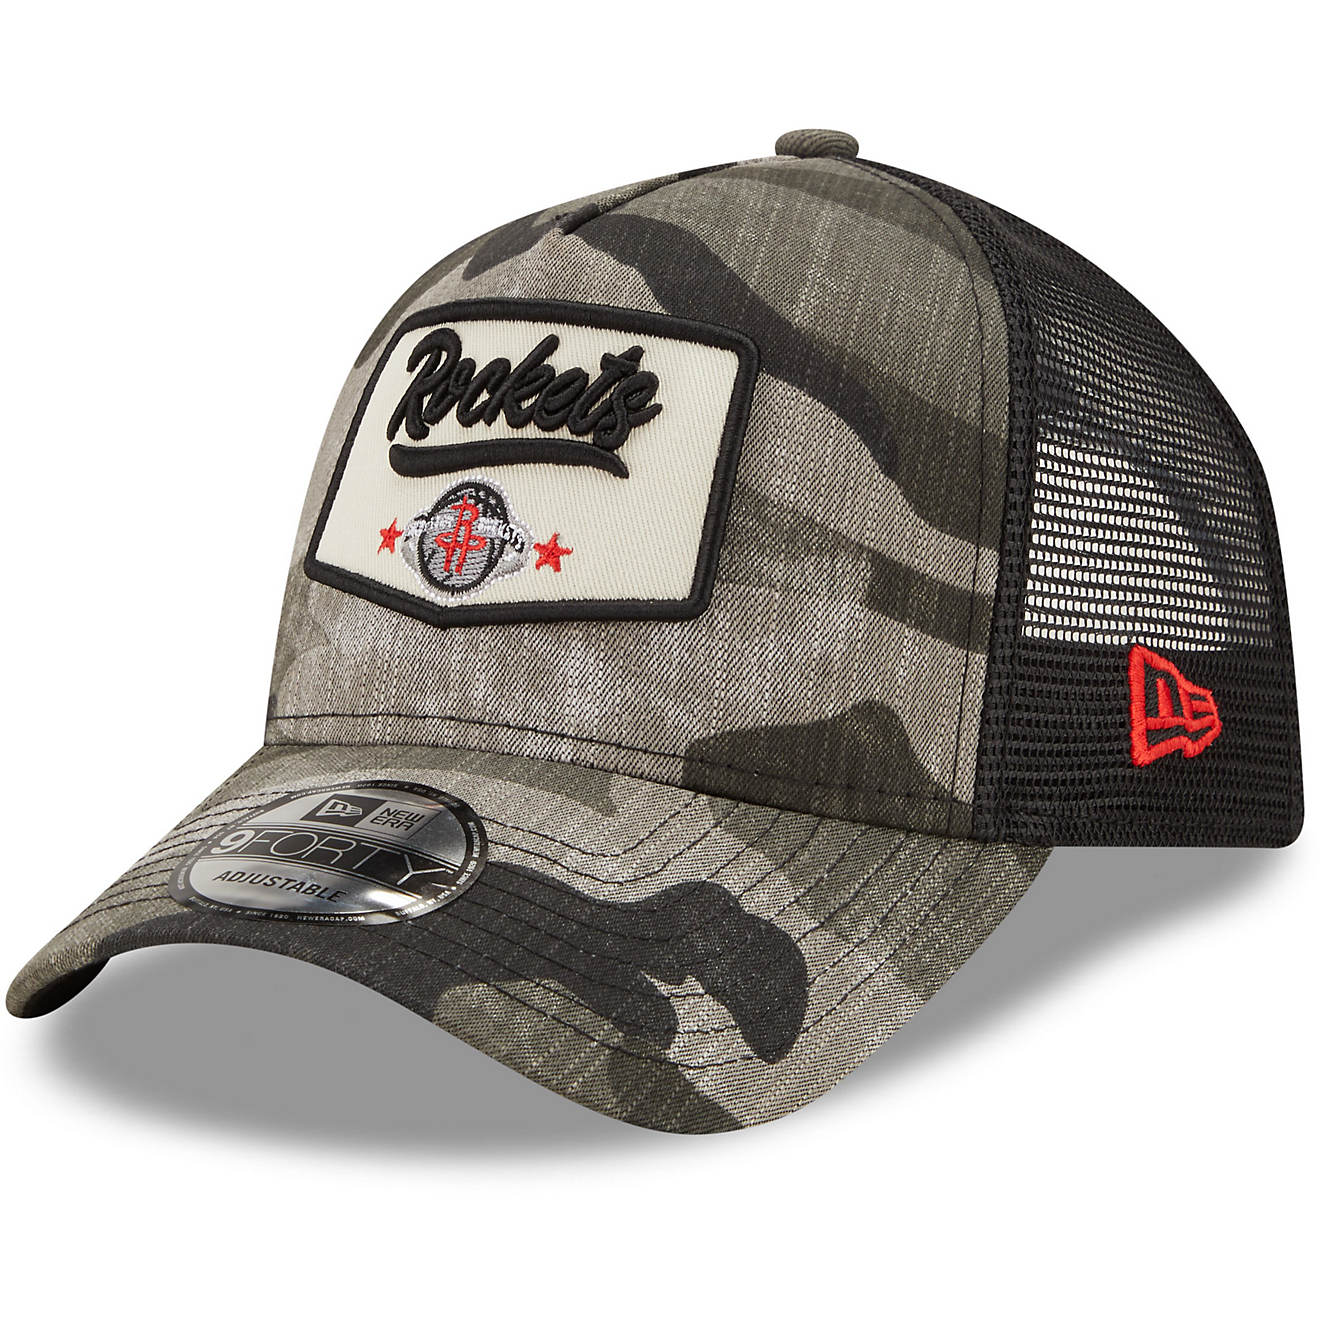 New Era Men's Houston Rockets Camo Patch 9FORTY Cap                                                                              - view number 1